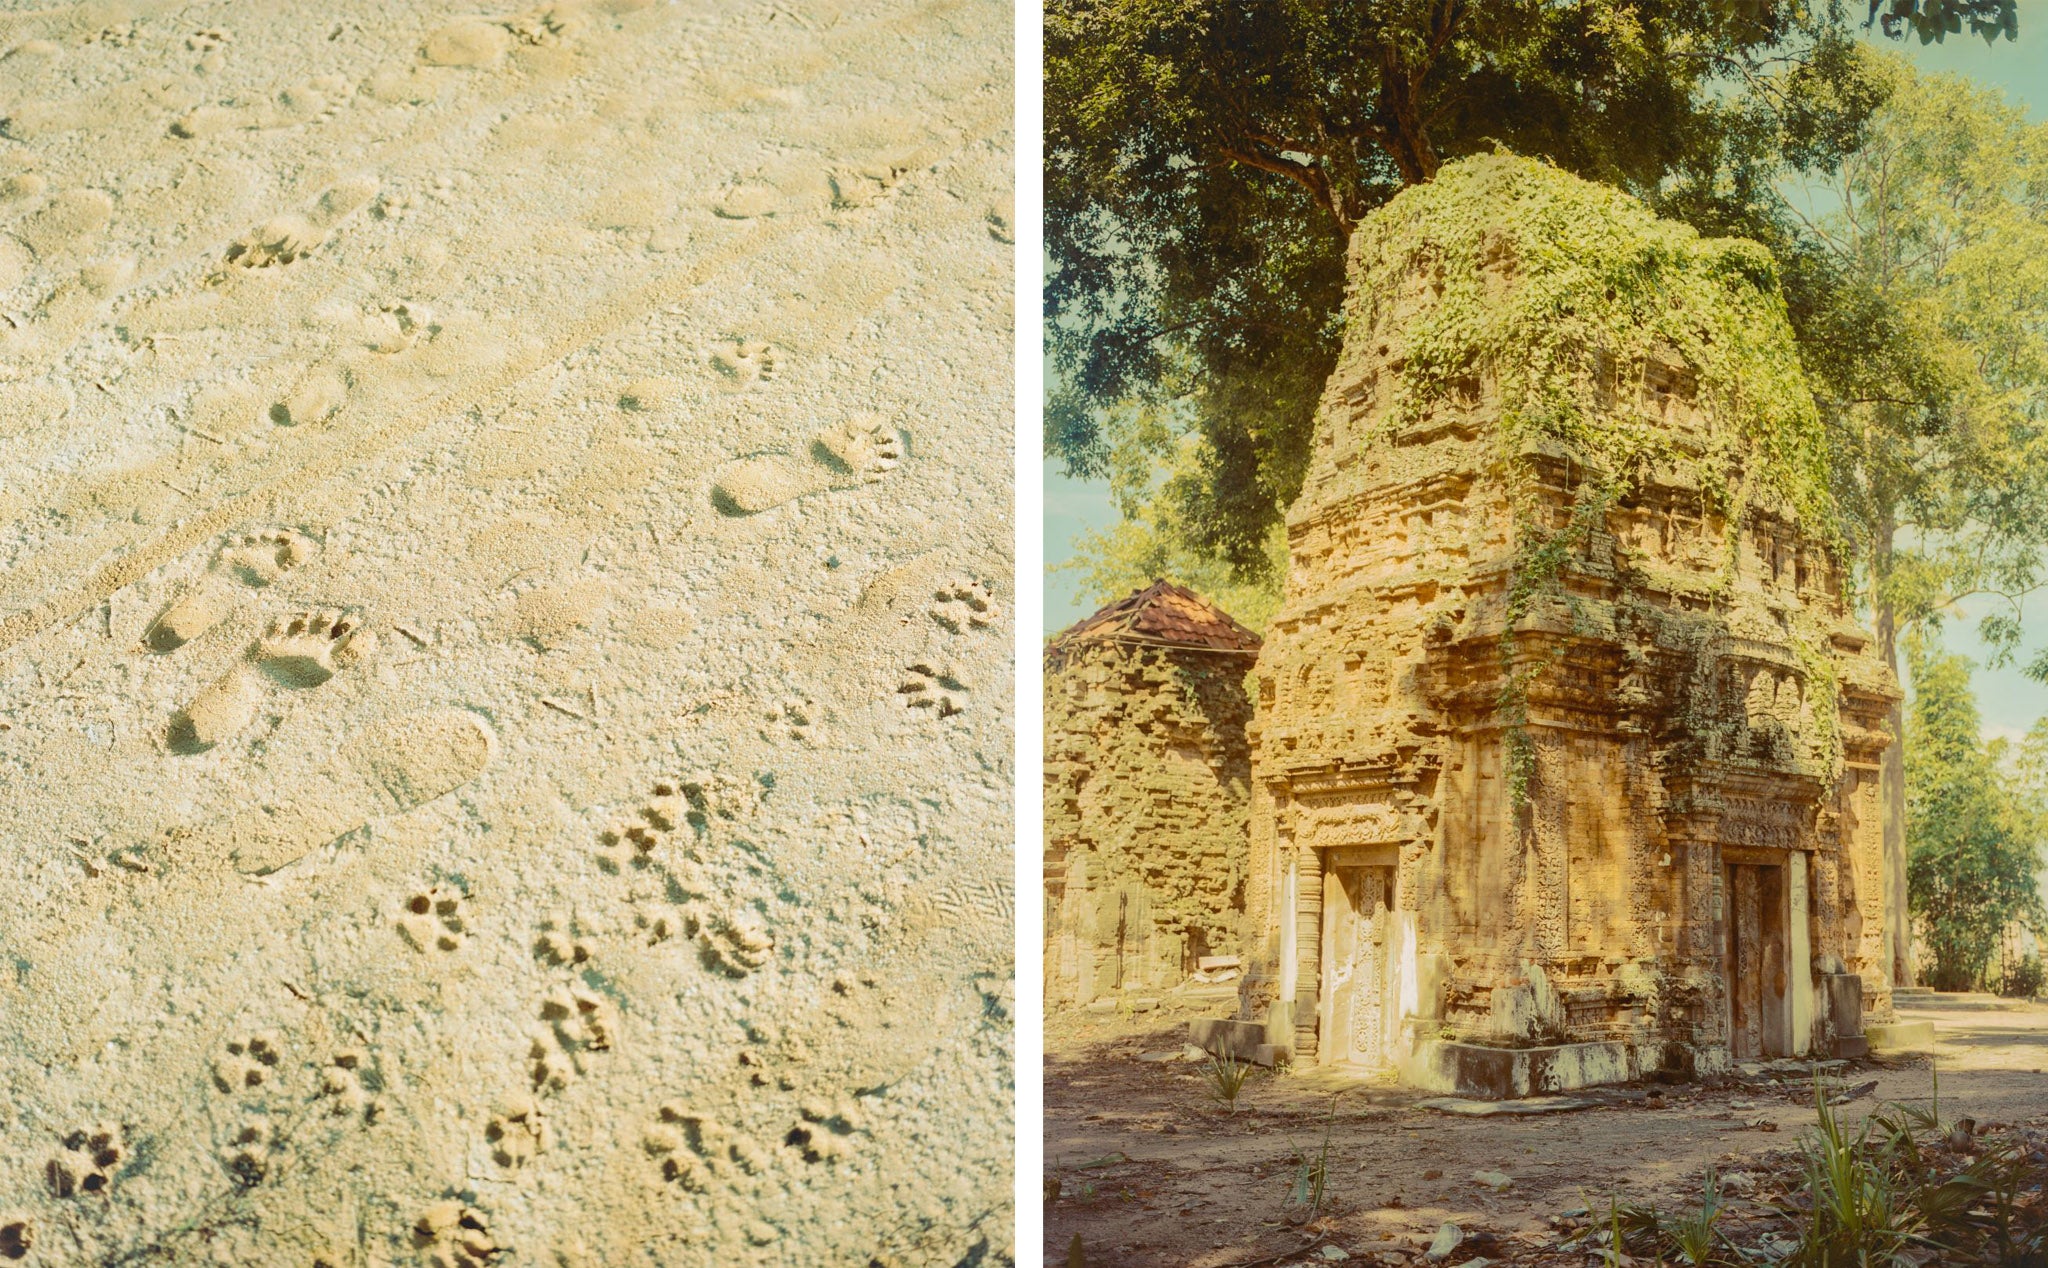 Left, the banks of Rota Tang village; right, the Srei temple in Kampong Preah